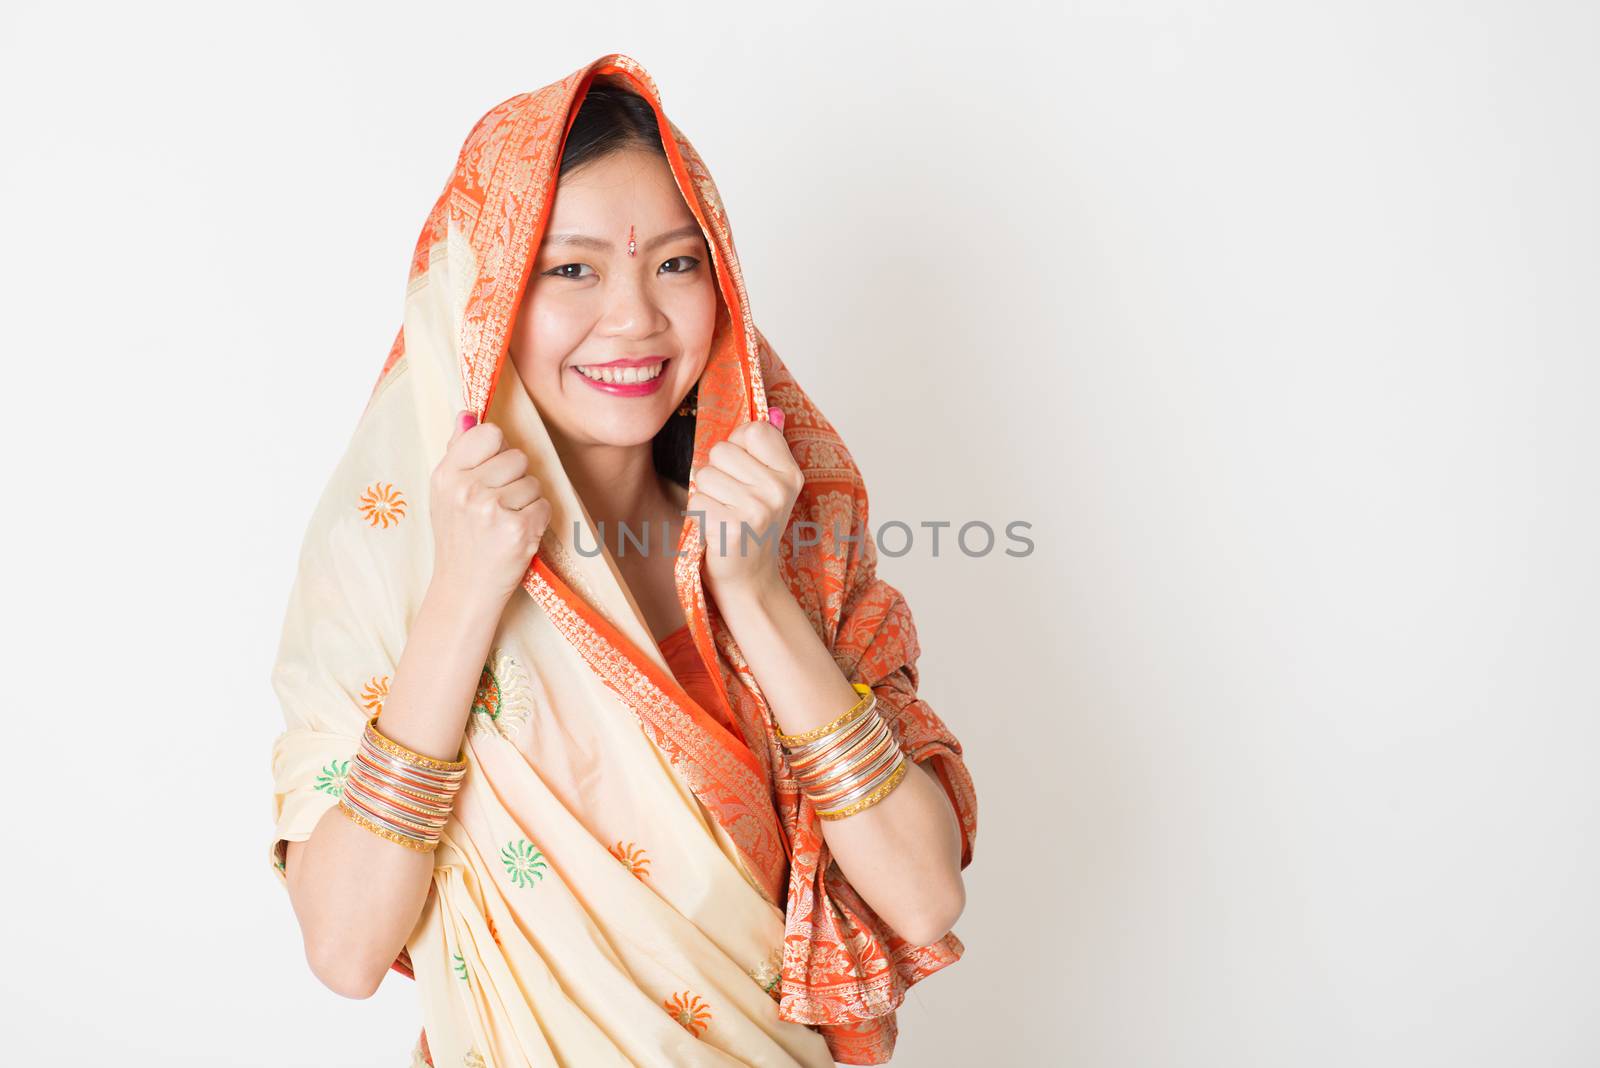 Portrait of young mixed race Indian Chinese woman in traditional sari dress smiling and looking at camera, with plain background.